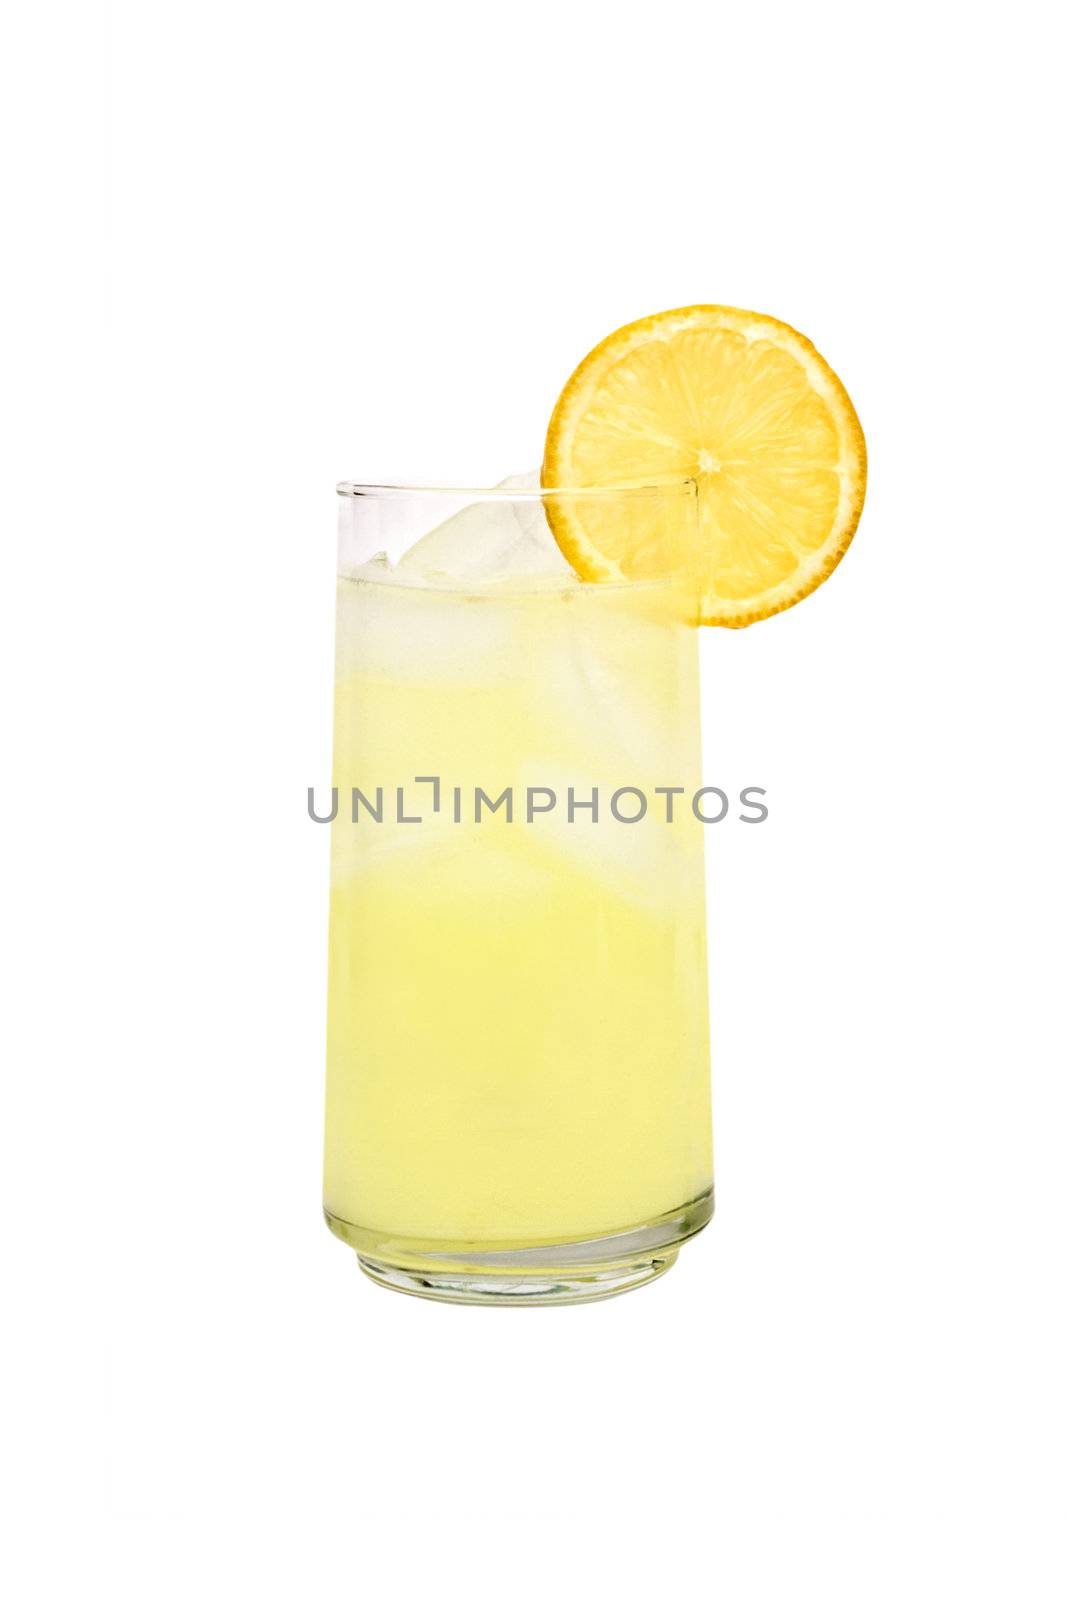 Glass of fresh made lemonade with a slice of lemon isolated on a white background.
